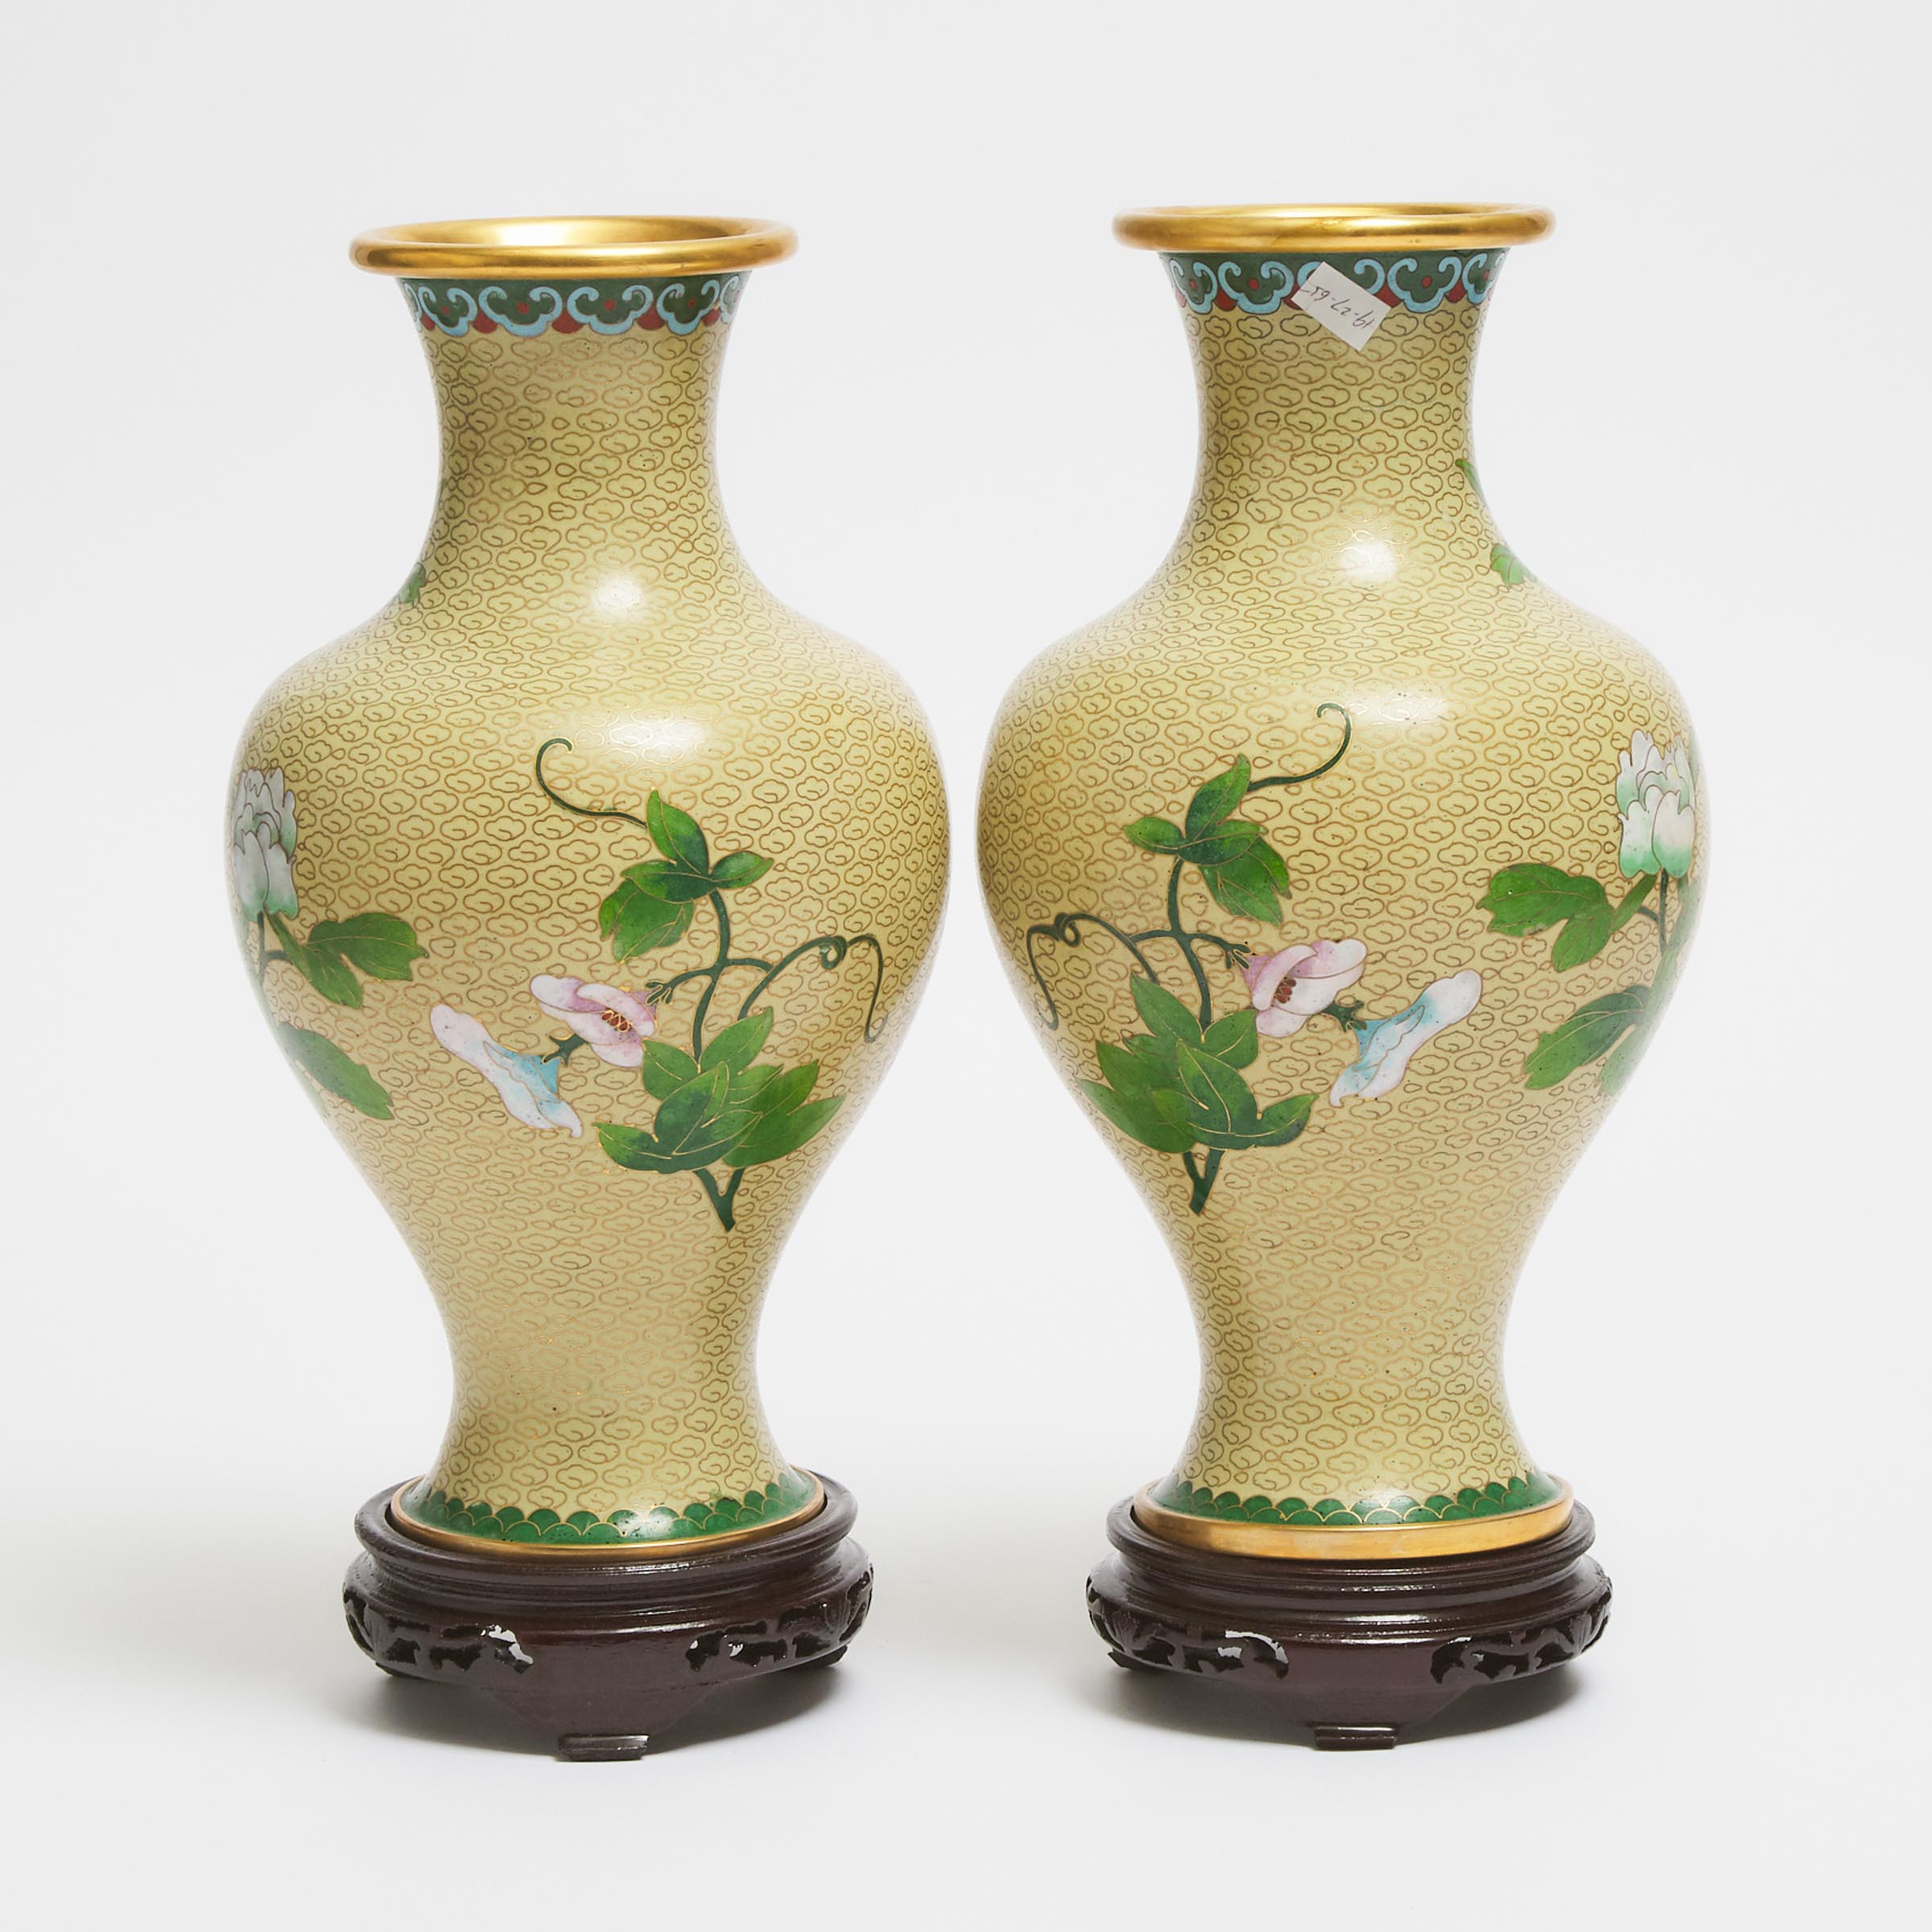 A Pair of Chinese Cloisonné Floral Vases, 20th Century